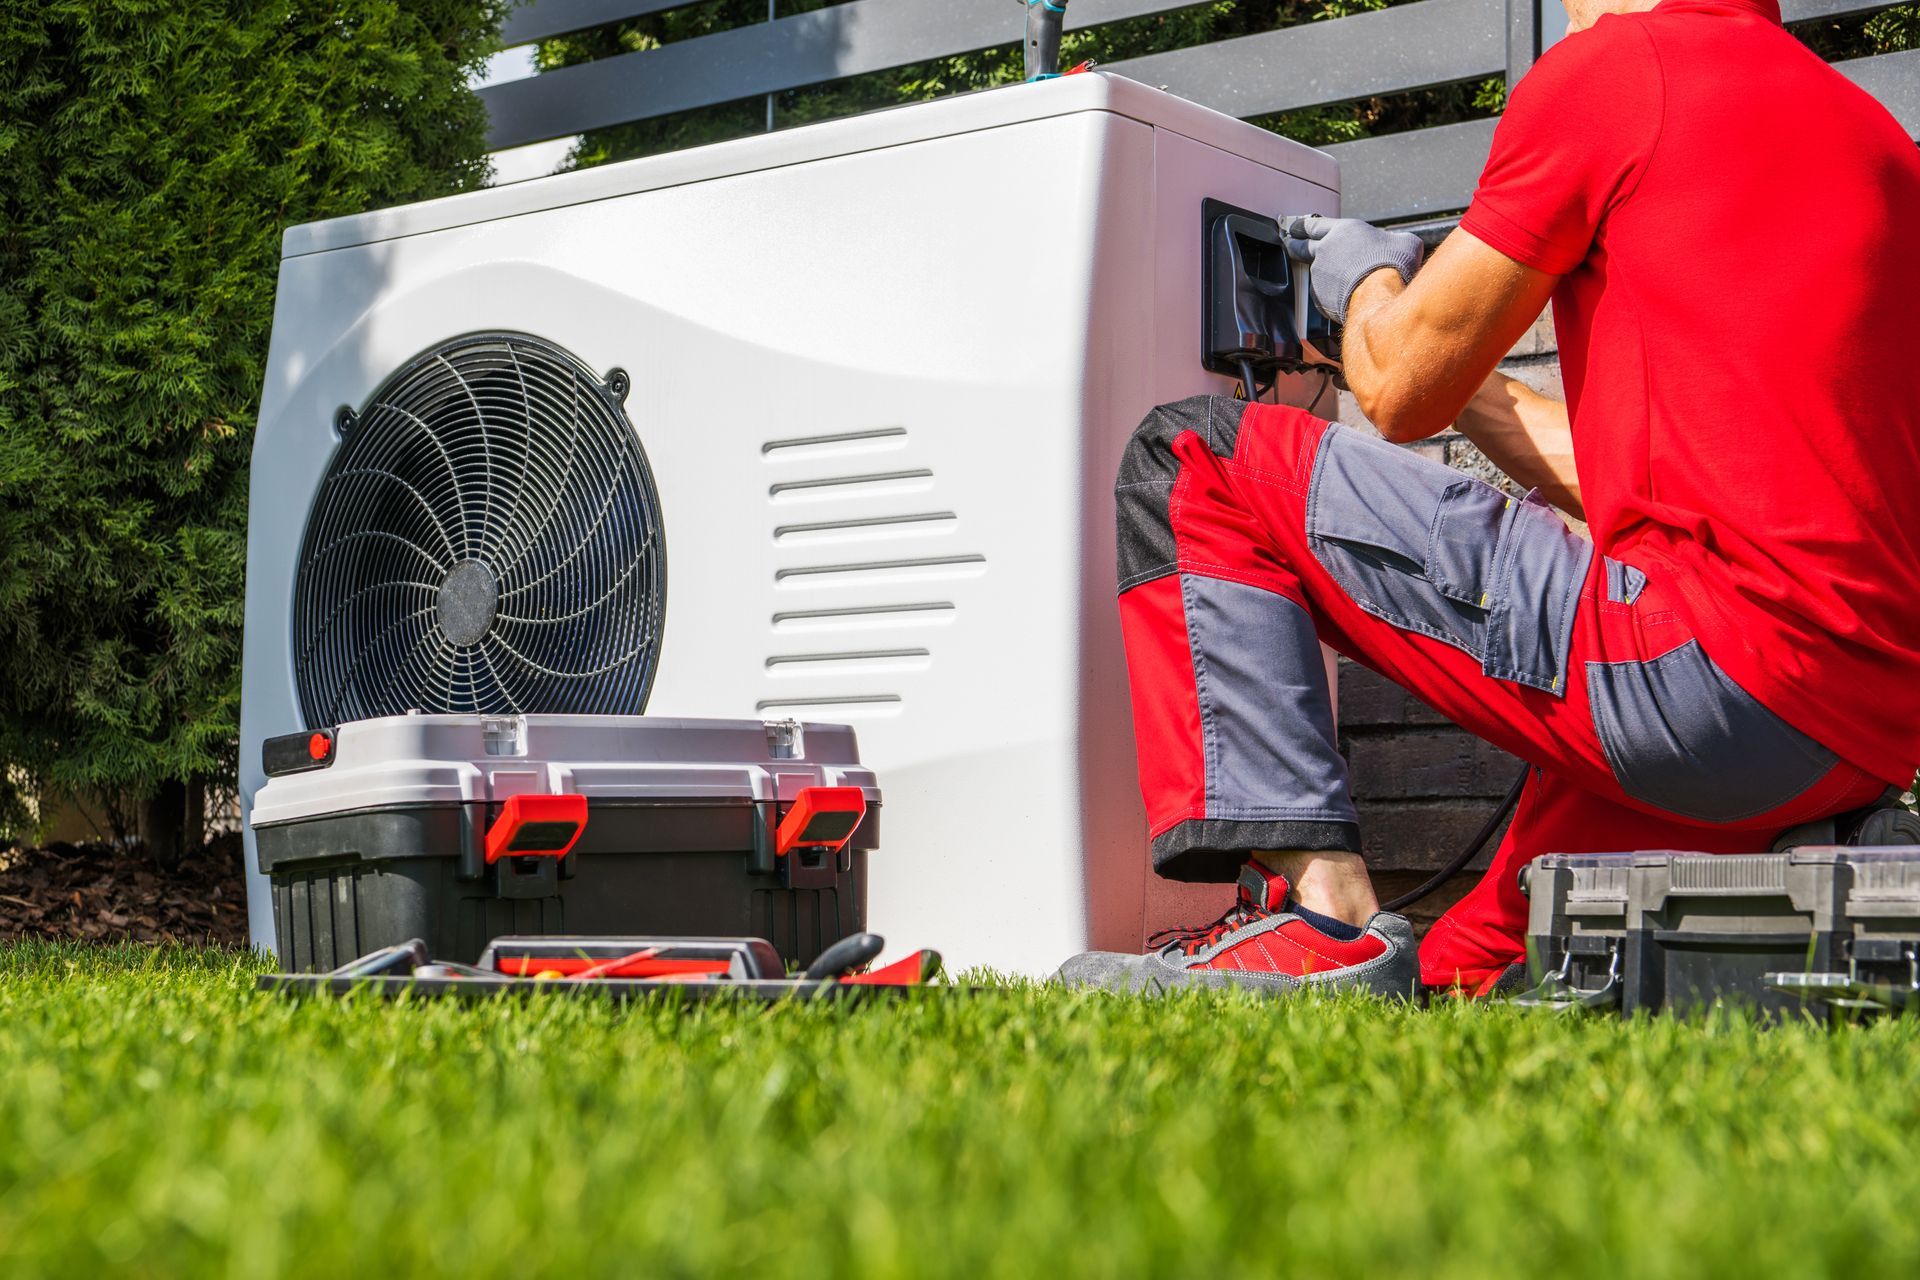 a man is sitting on the grass fixing an air conditioner .